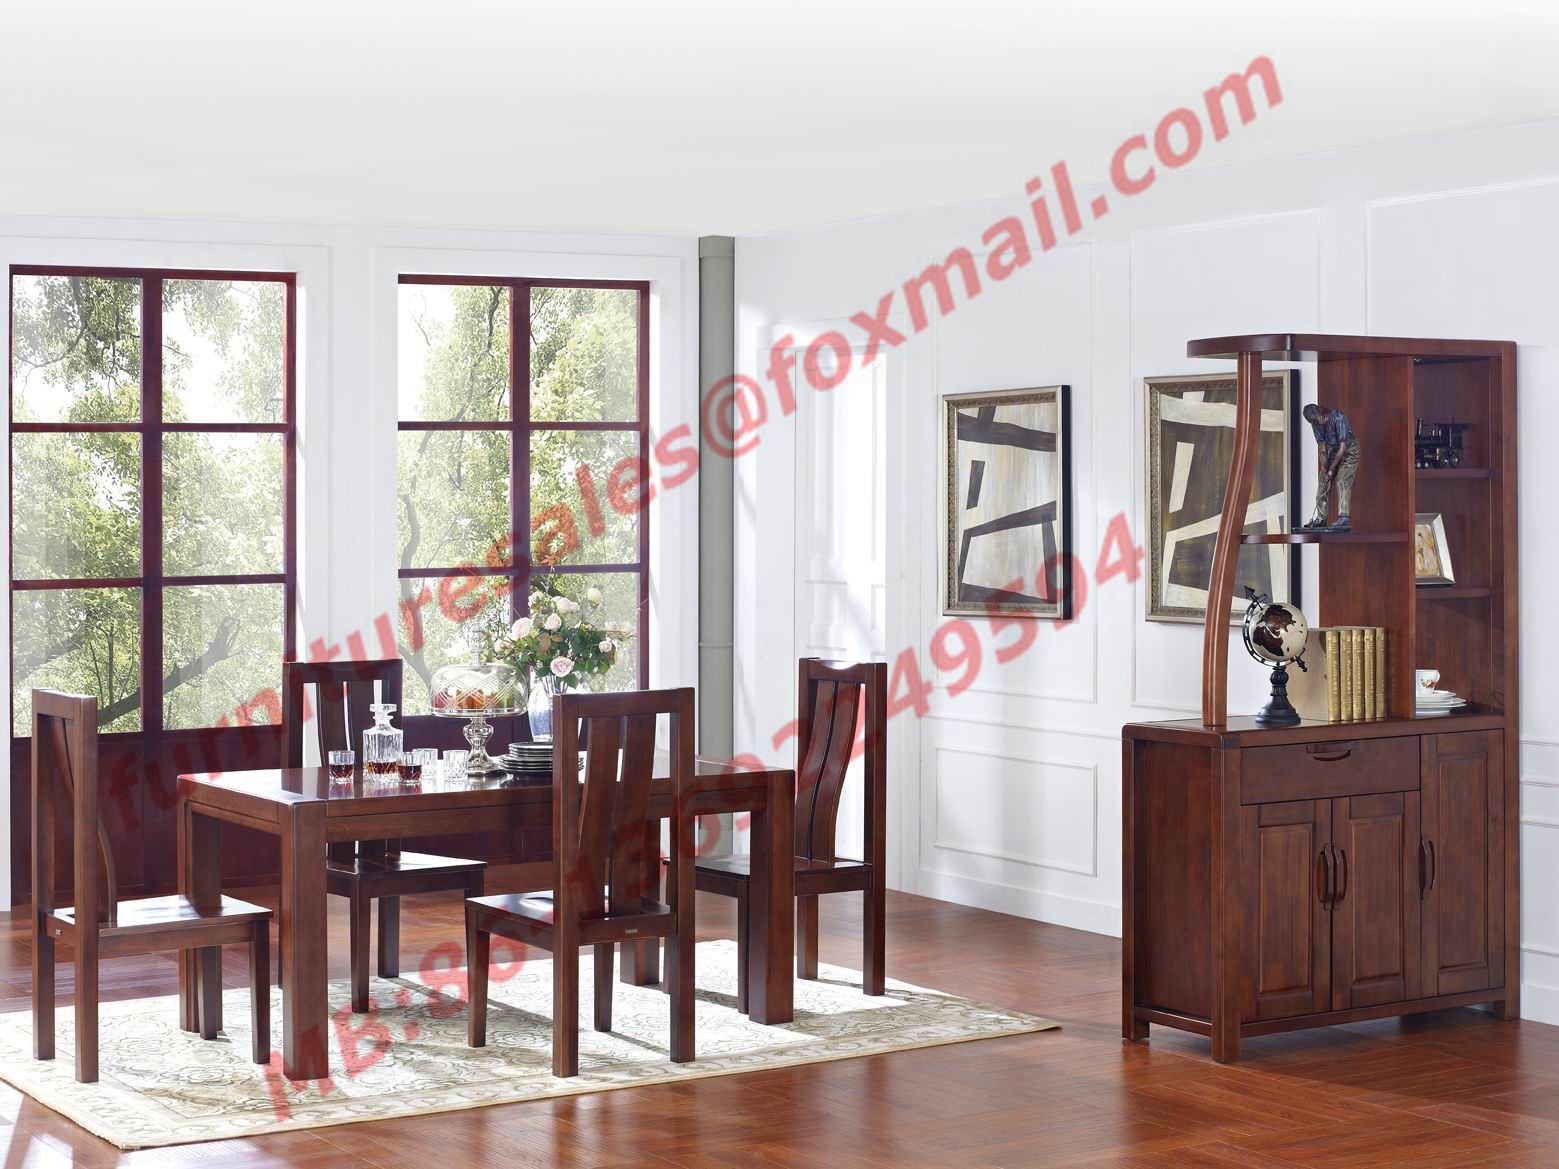  Divider Cabinet with Storage in Living Room Furniture Manufactures